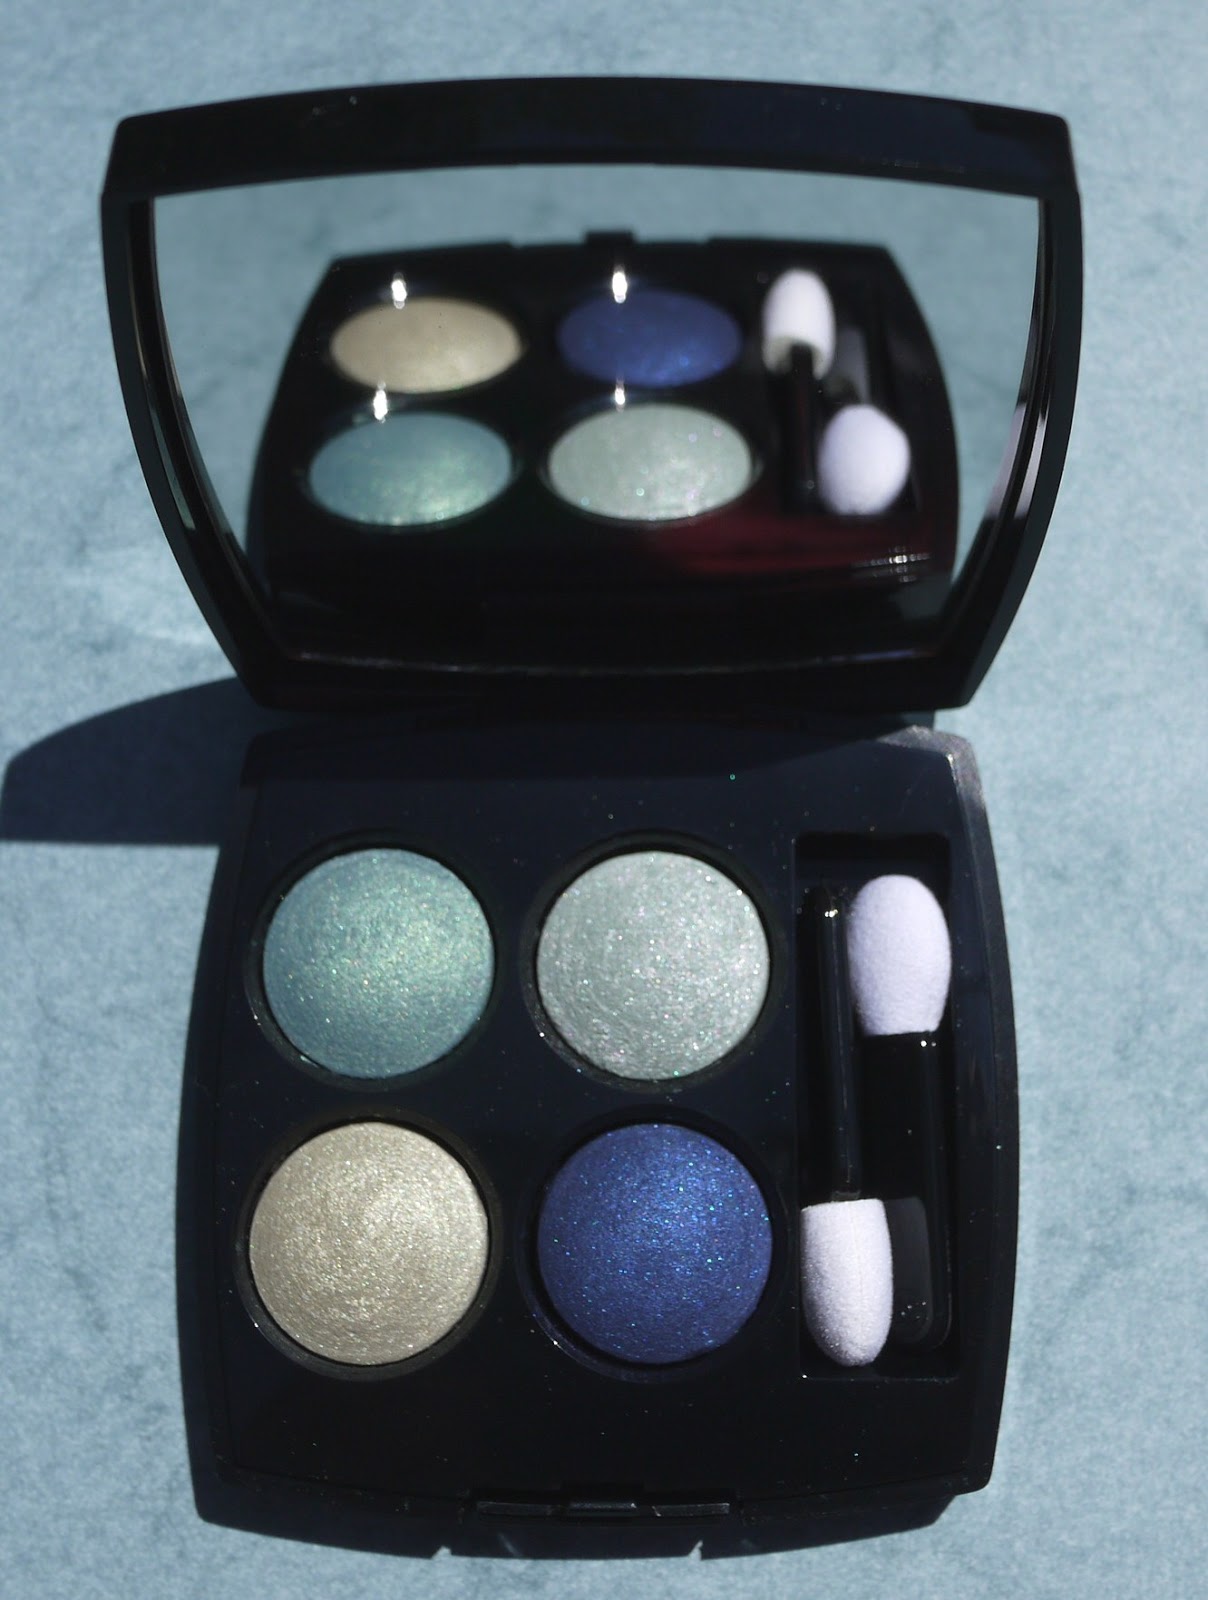 Chanel Les 4 Ombres Eyeshadow Quad – 33 Prelude Review, Swatches and Photos  - Fables in Fashion